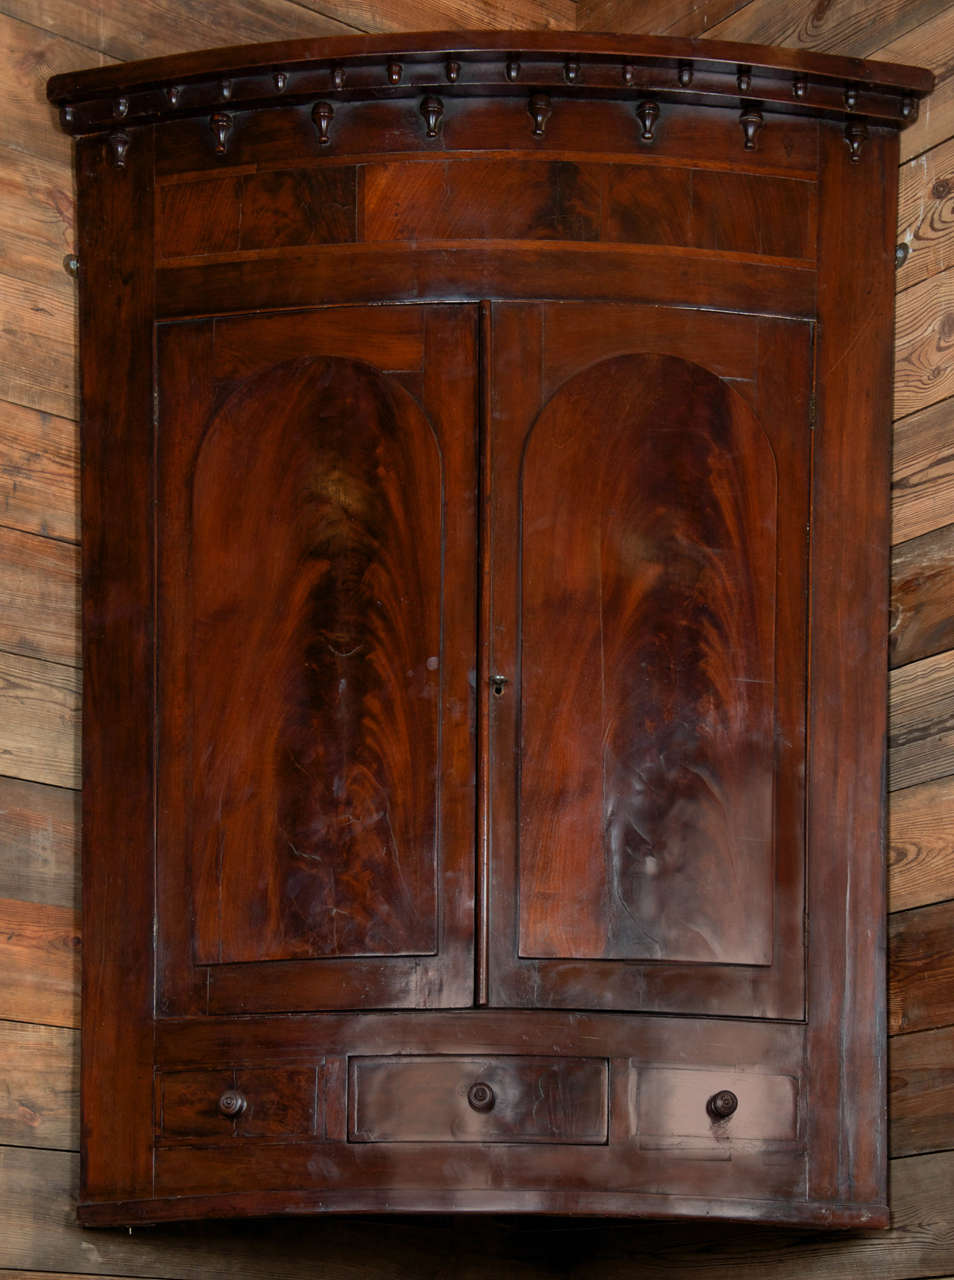 A large and spectacular antique Georgian corner cabinet featuring outstanding in-laid flame mahogany. This late-eighteenth century cabinet has a lovely bowed front with two doors featuring arched panels of stunning matching flame mahogany, which